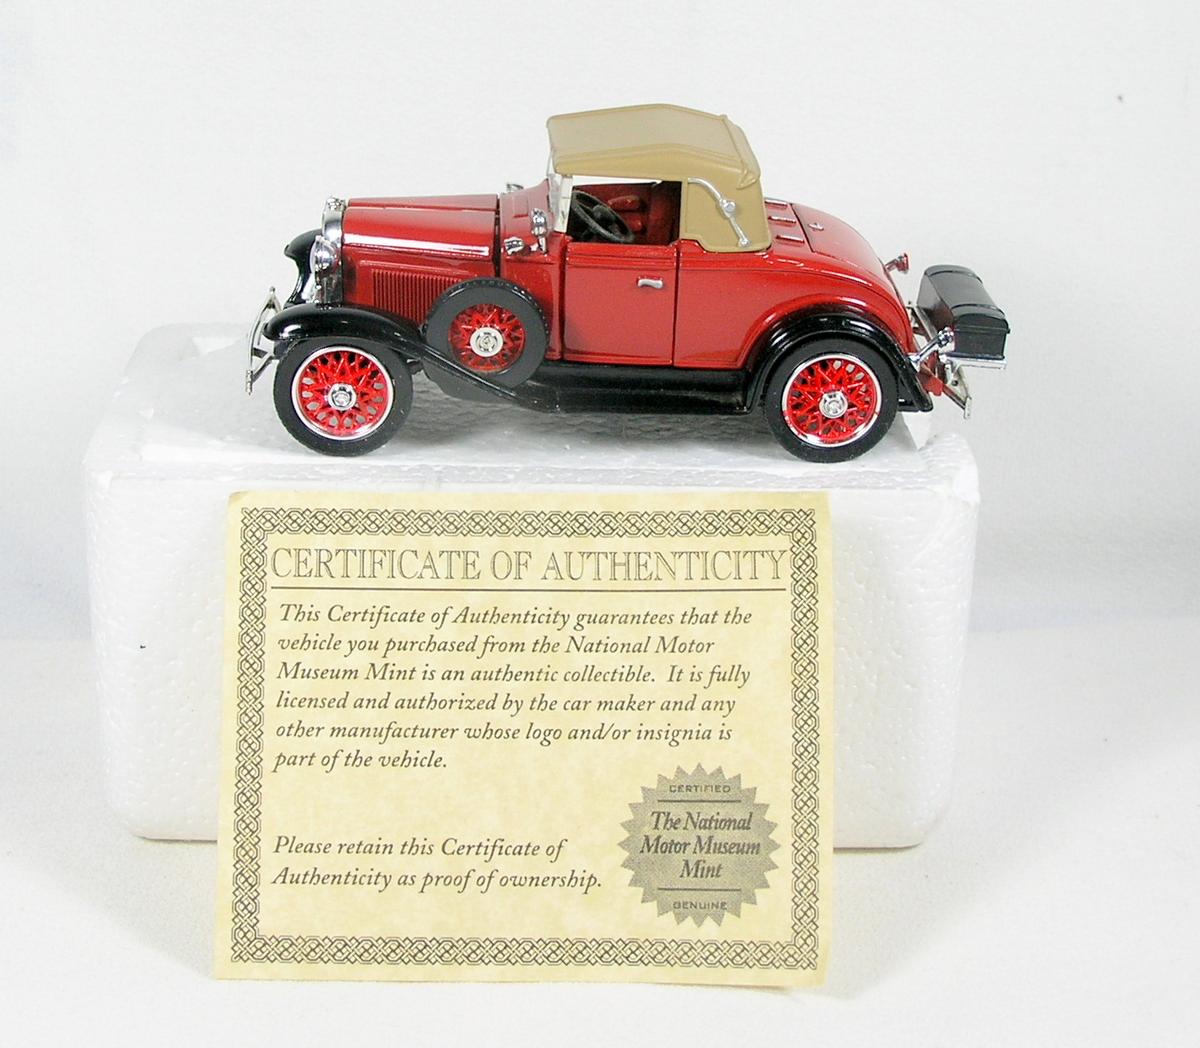 Diecast Replica of 1931 Chevrolet Sports Cabriolet From National Motor Muse